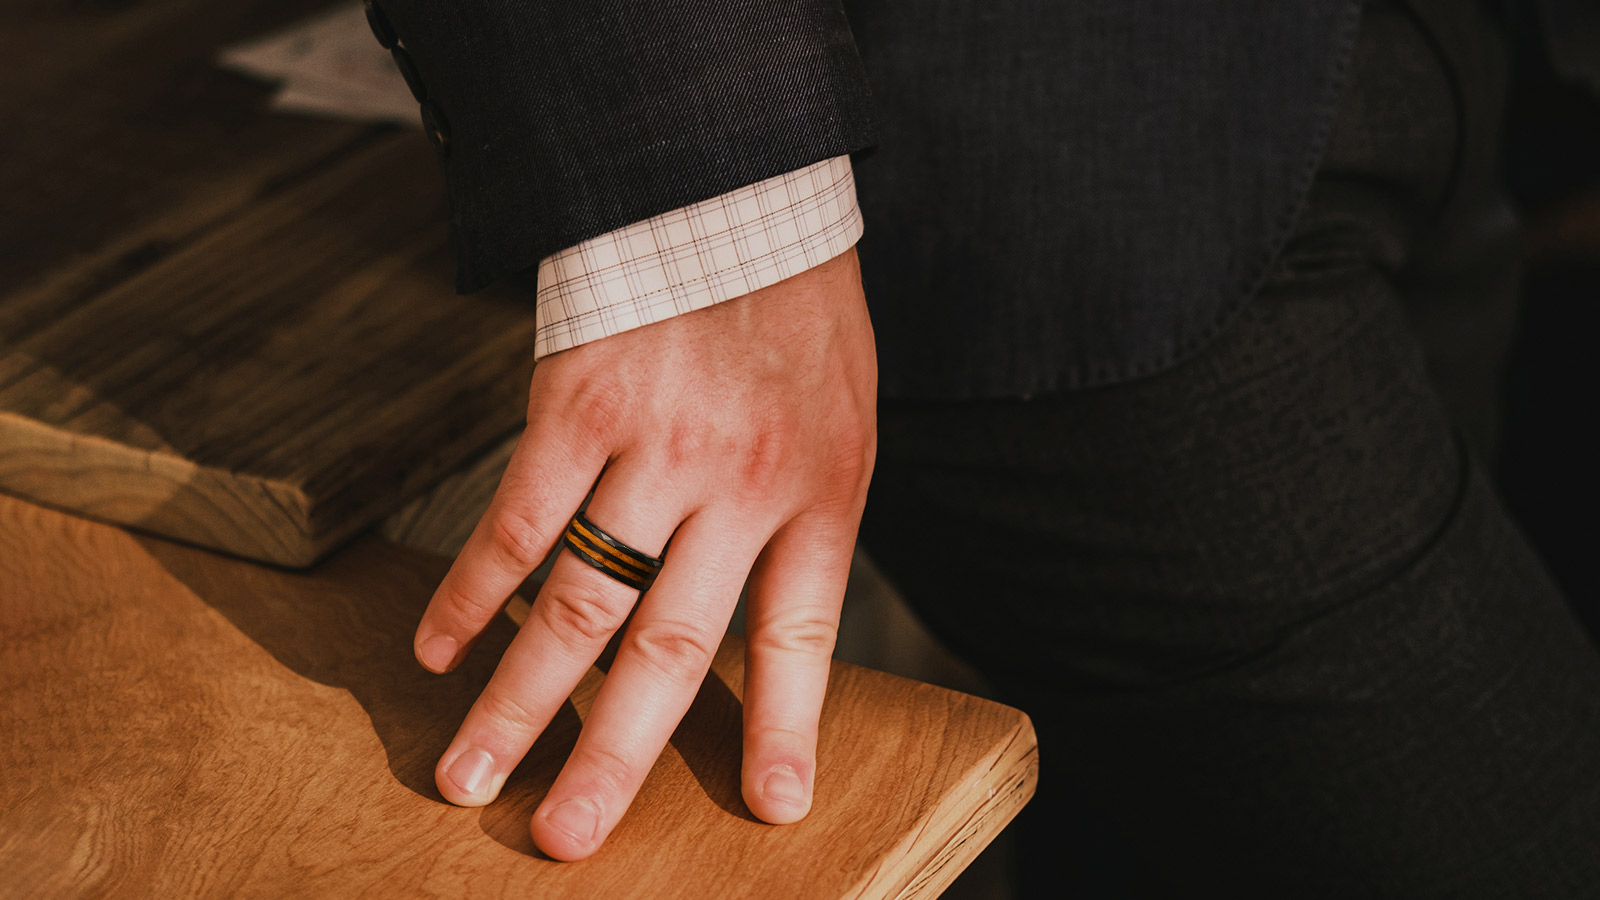 Man in a suit leaning on a wooden table with a wooden ring on his hand